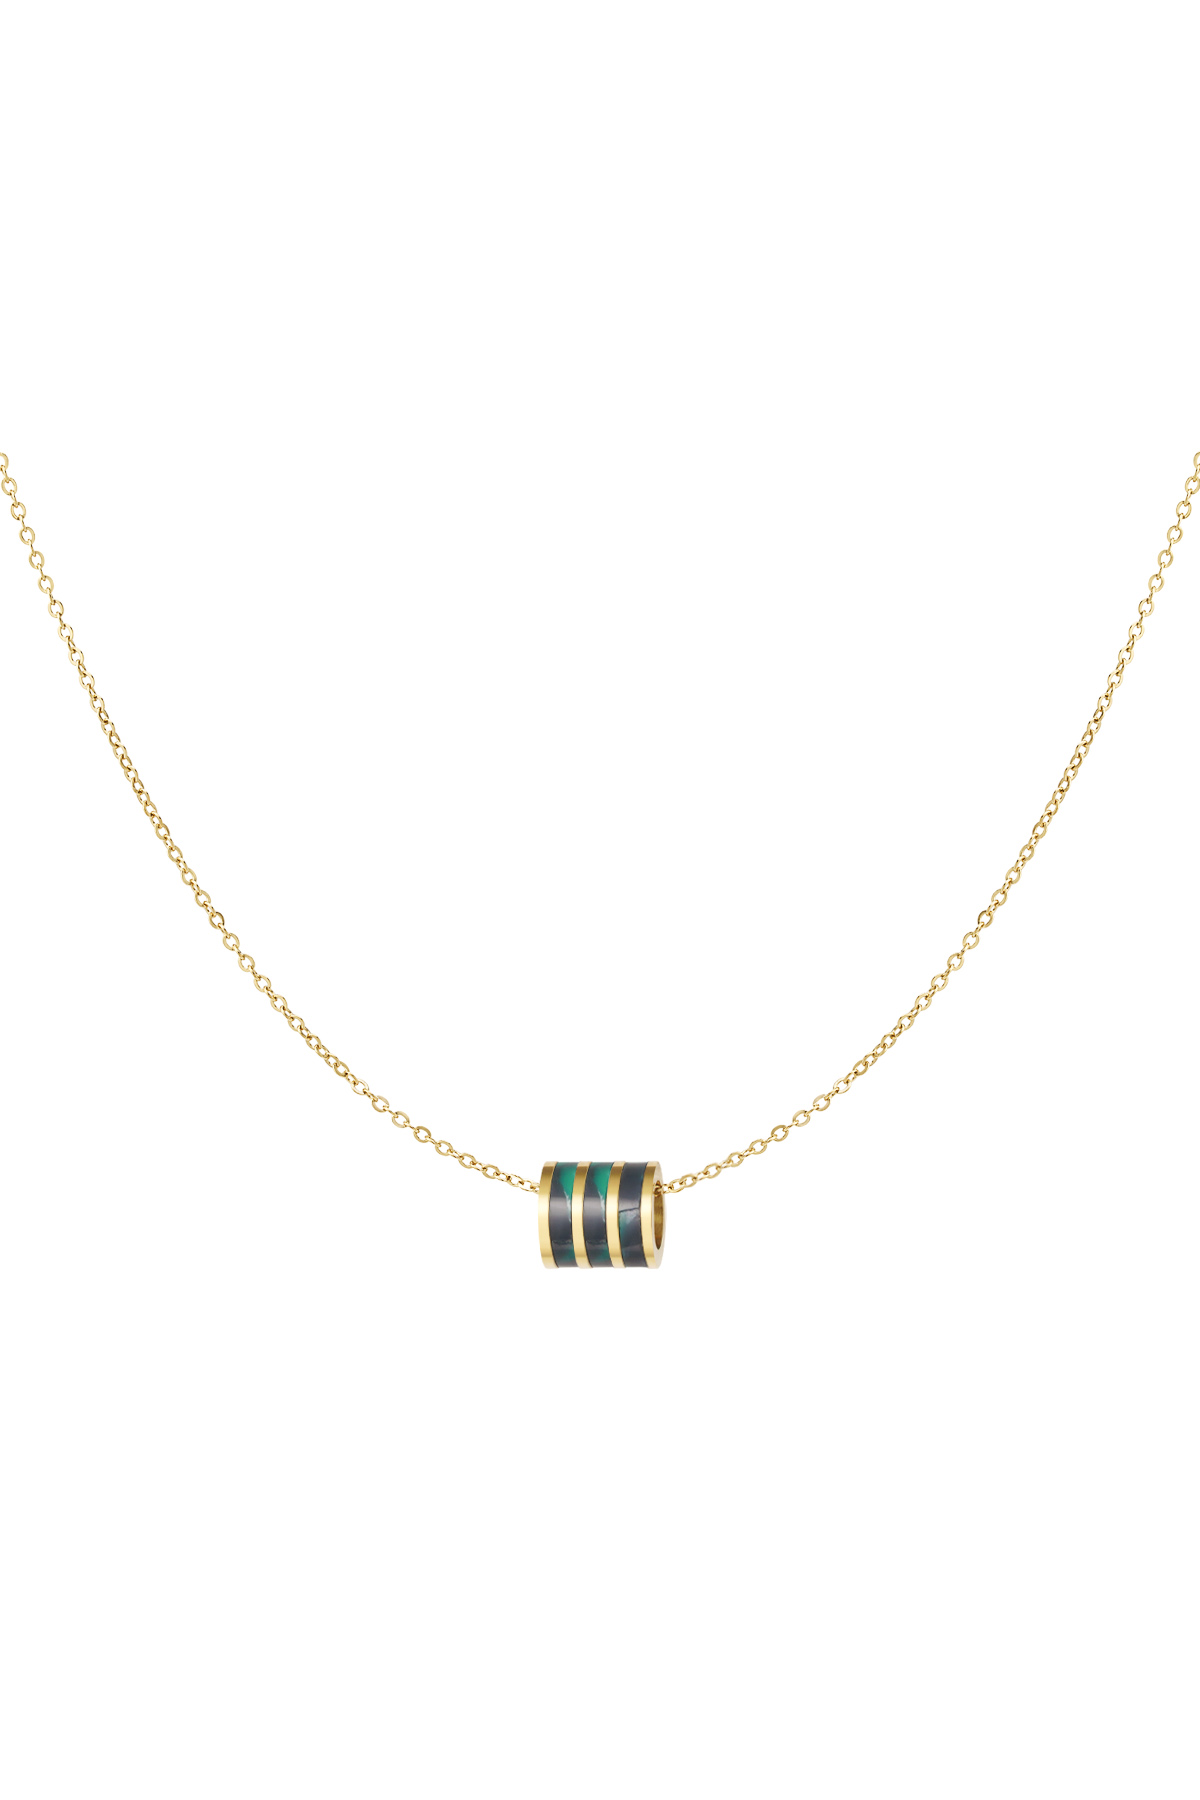 Necklace round charm - gold/green h5 